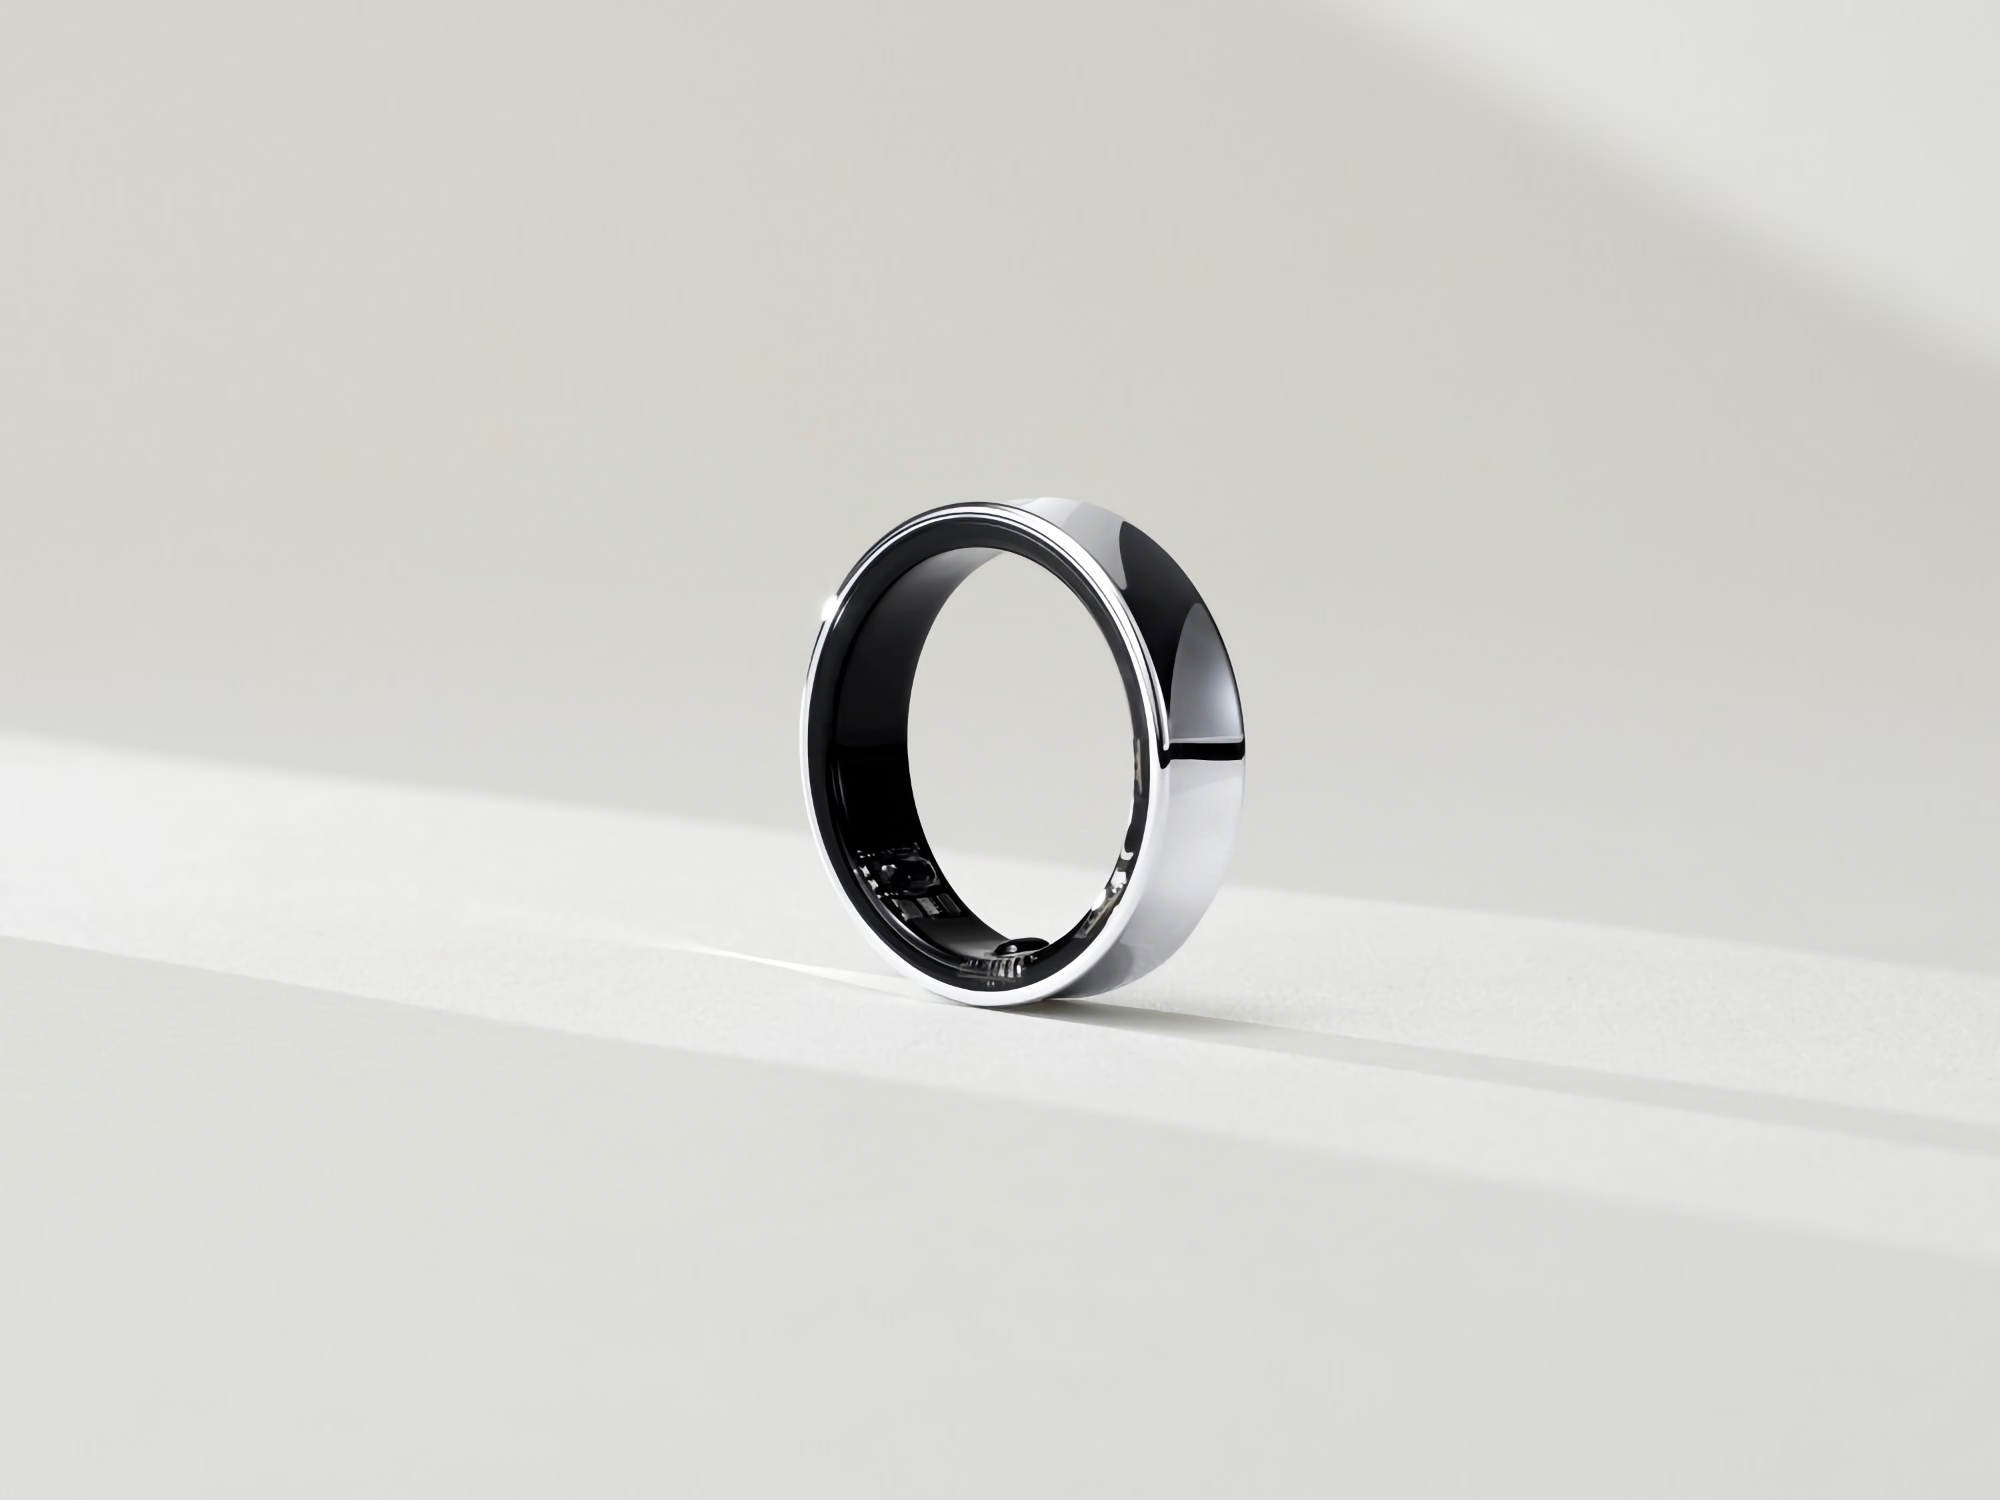 Samsung showed off the Galaxy Ring and revealed when the new product will be released